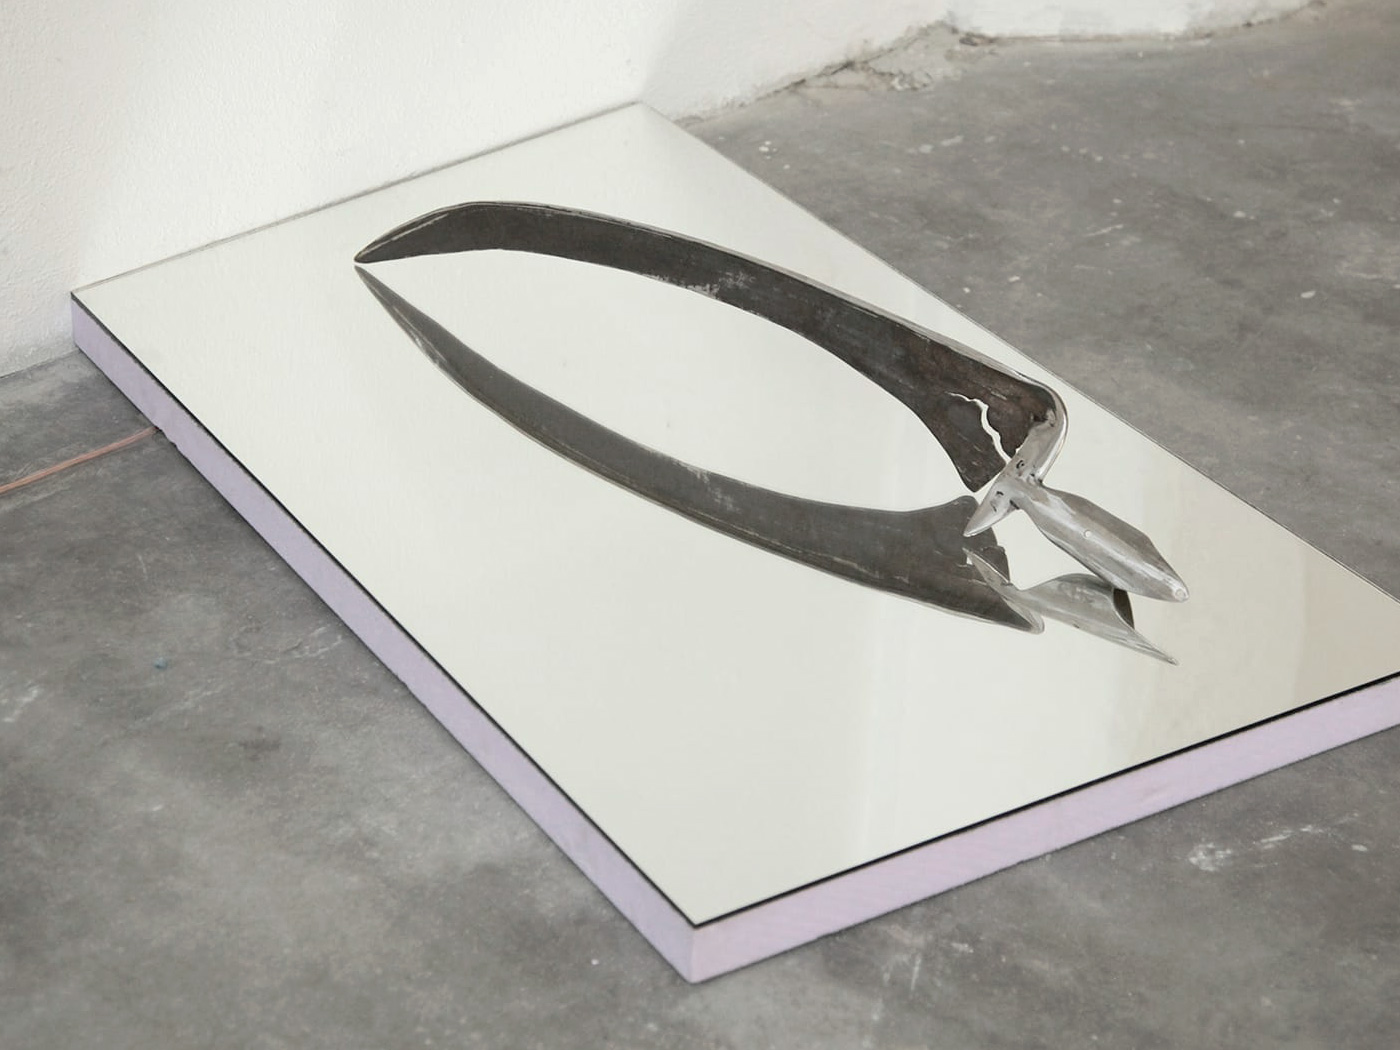 Modified steel scythe on a mirror surface. Under the reflective surface, a base made of lilac-colored foam and a copper cable running out of the picture to the left.